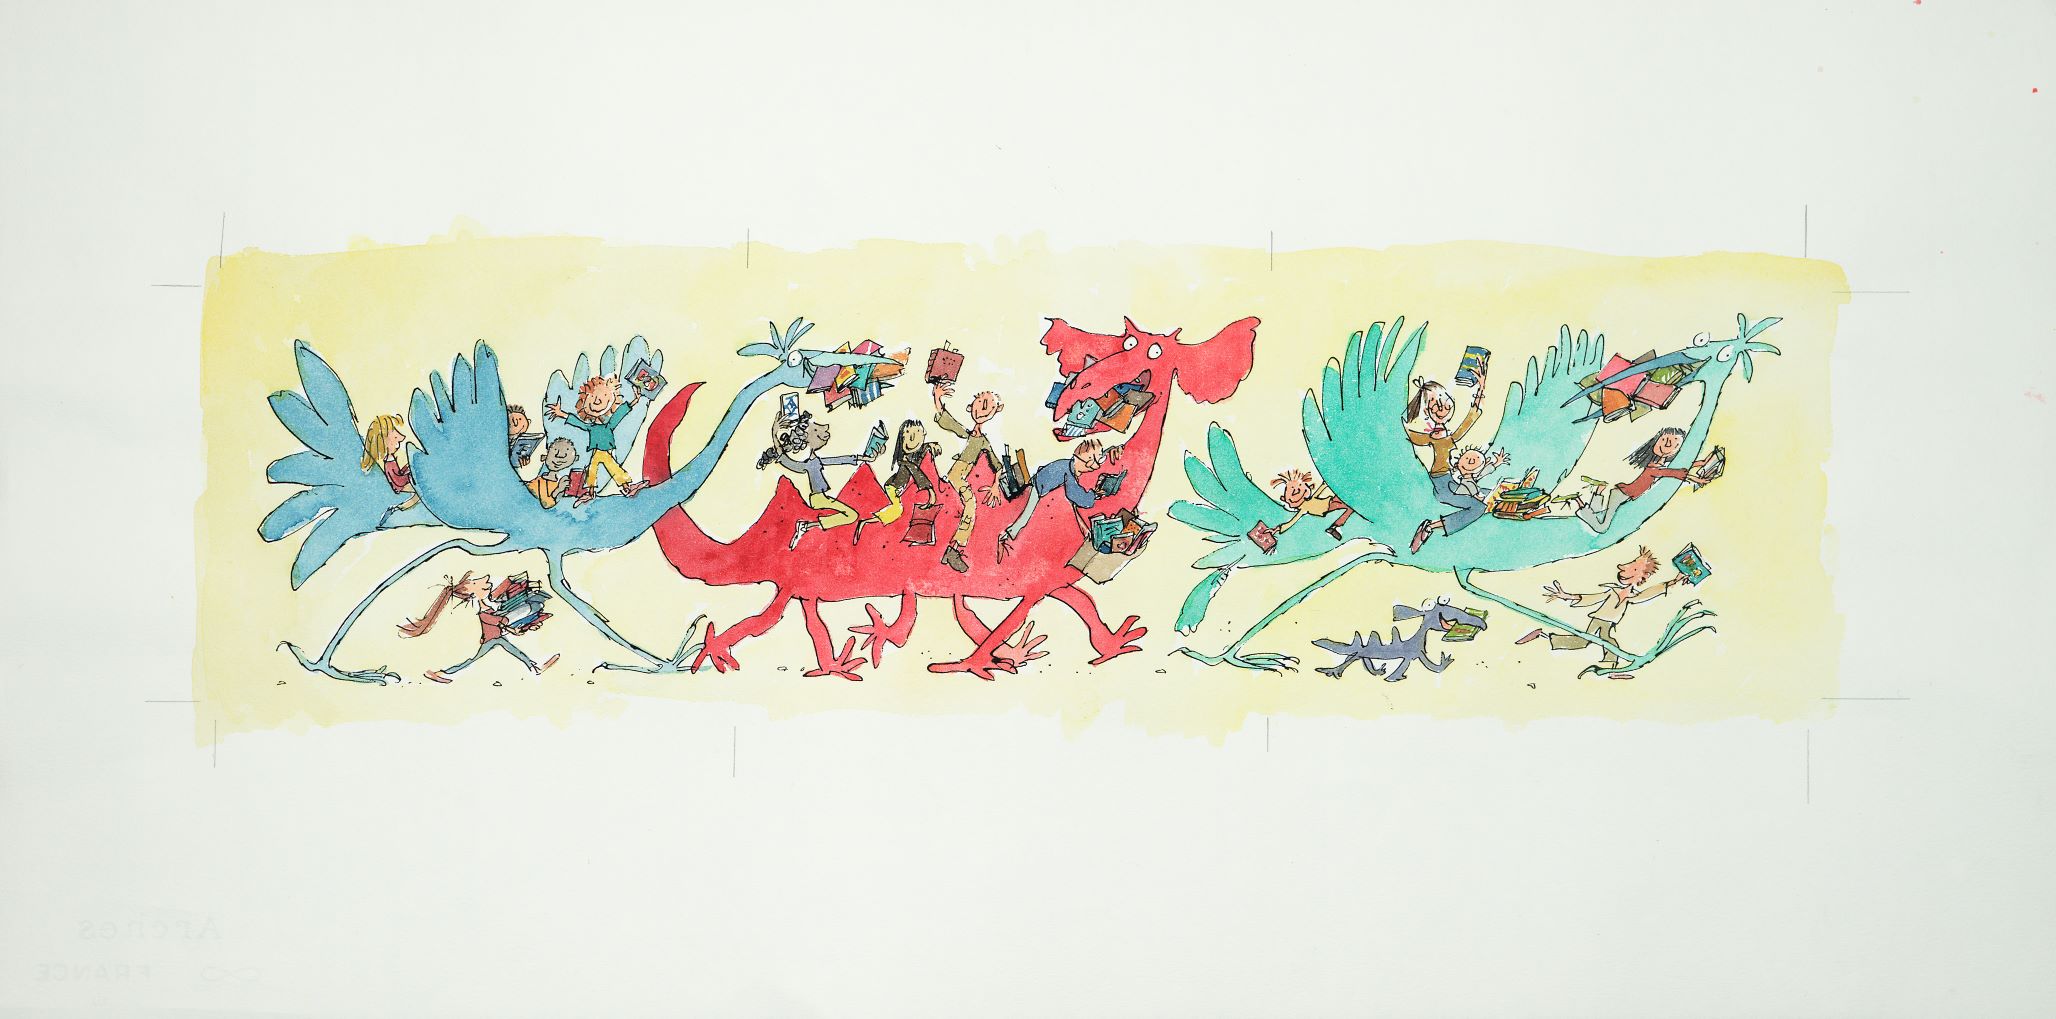 Quentin Blake: Birds, Beasts and Explorers